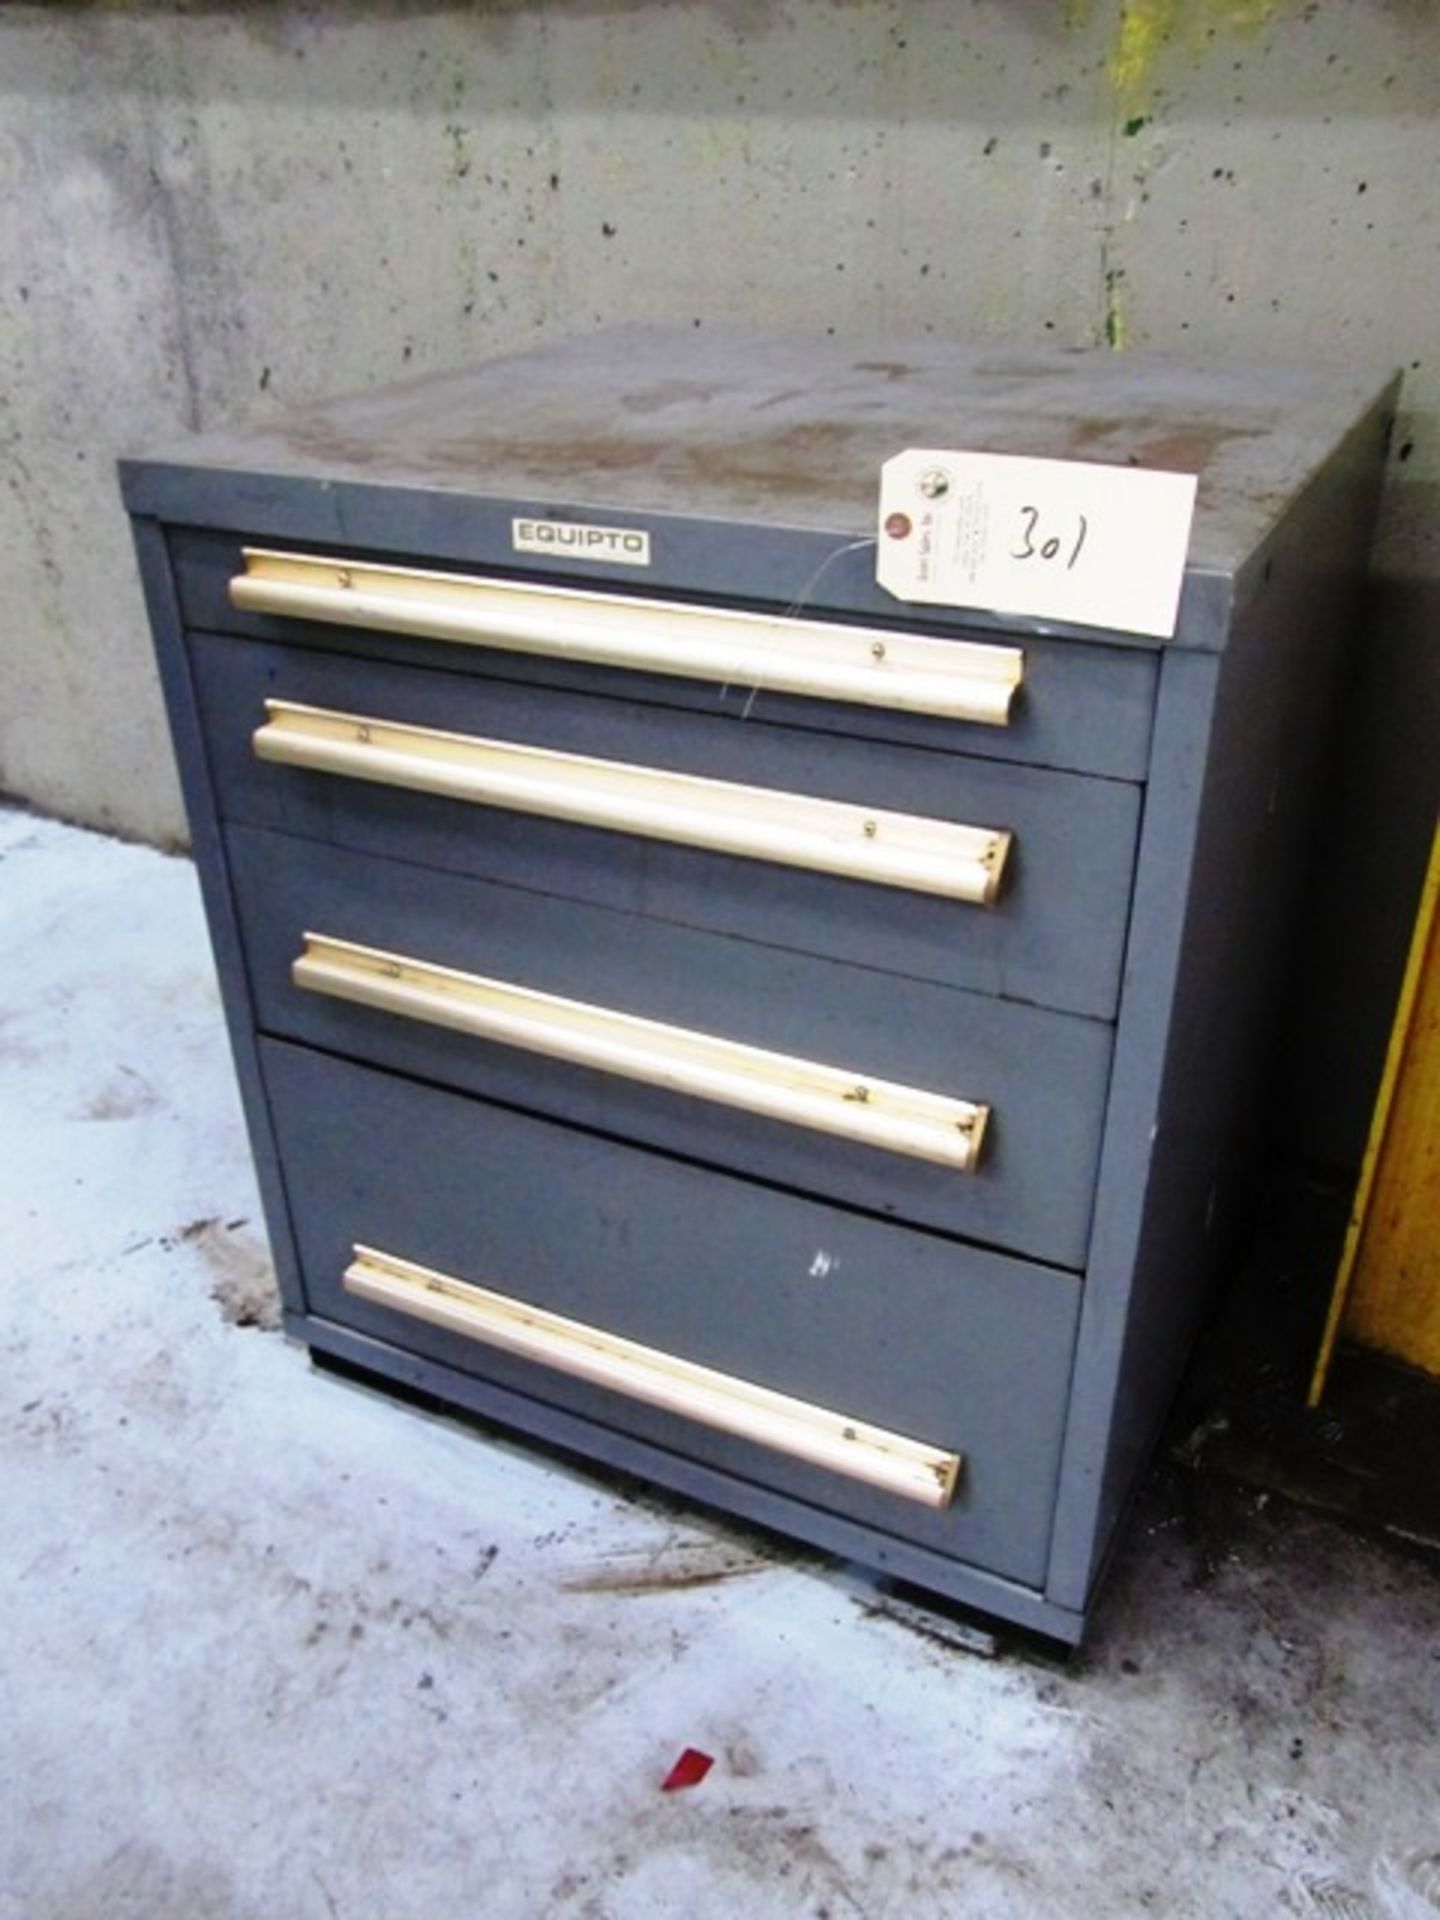 Equipto 4 Drawer Vertical Tool Cabinet